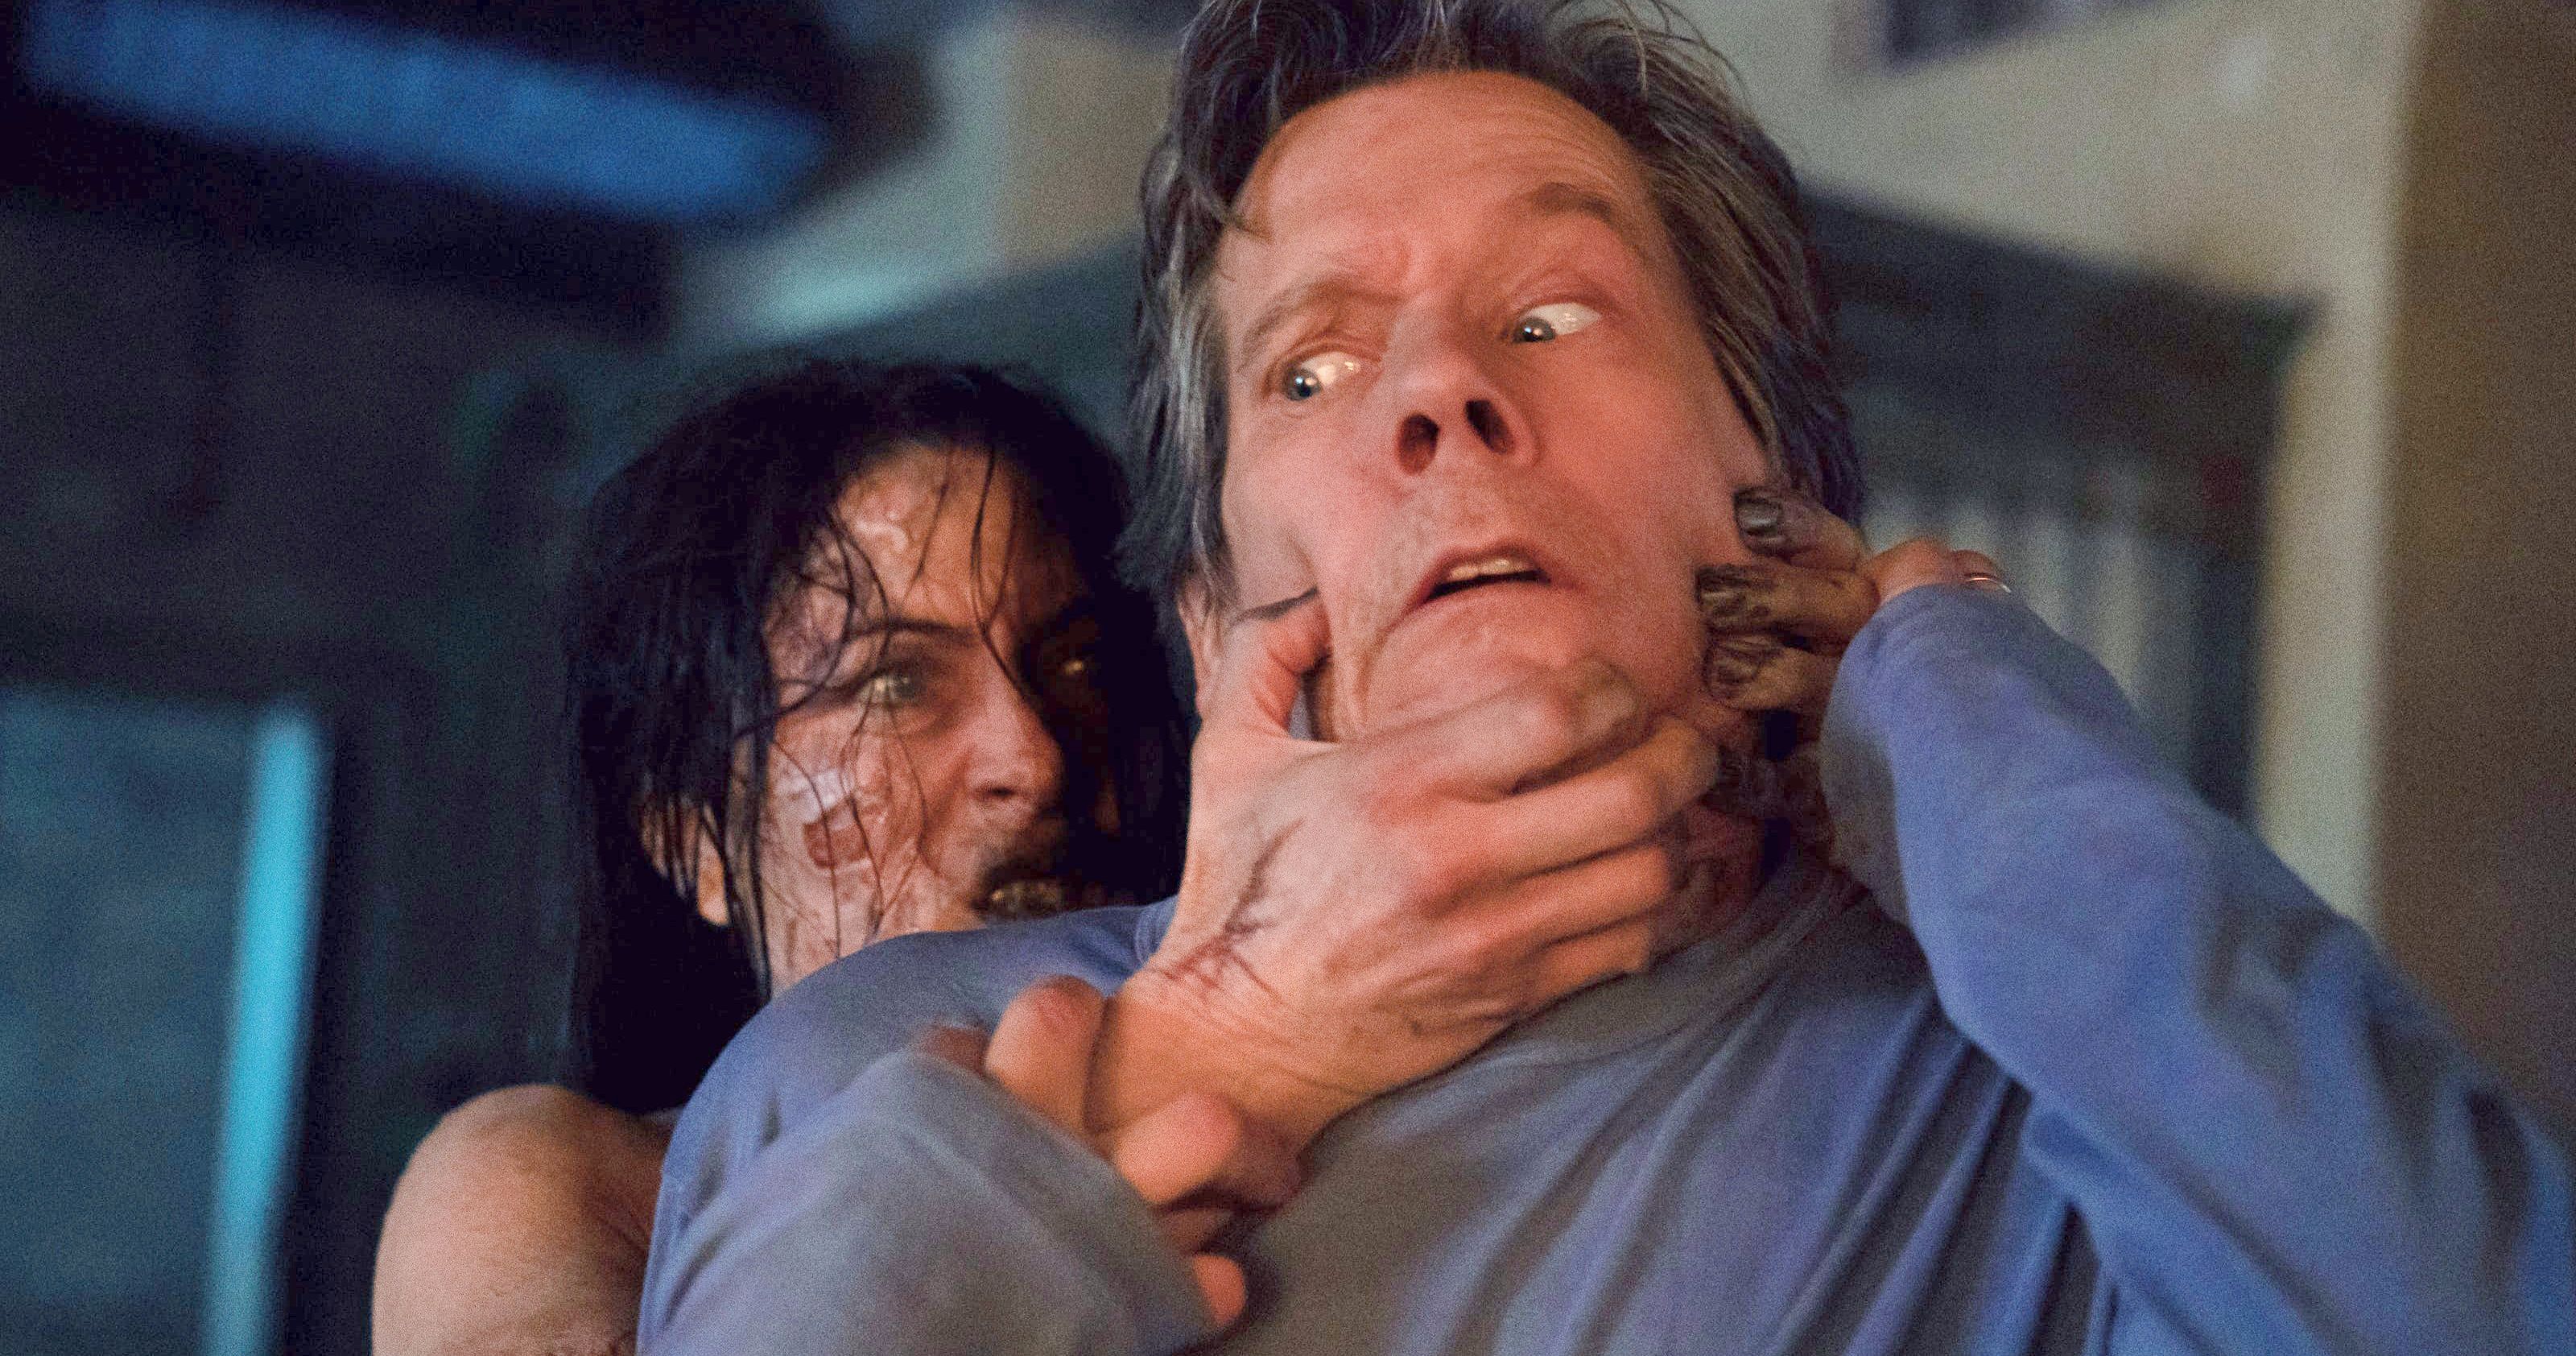 You Should Have Left Director Tried to Scare Kevin Bacon for Real, But It Backfired